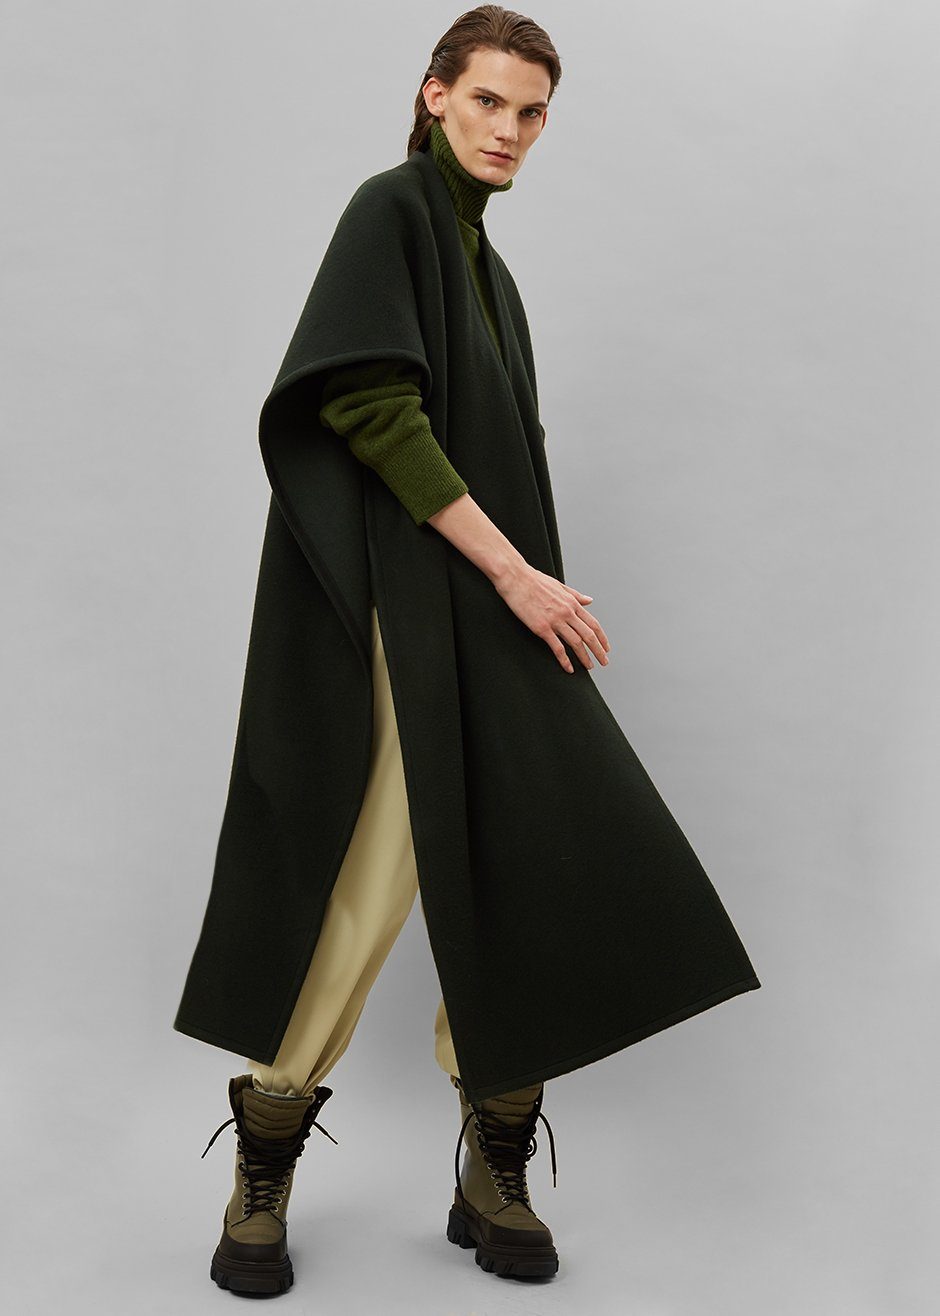 Verina Cape - Forest Green - 7